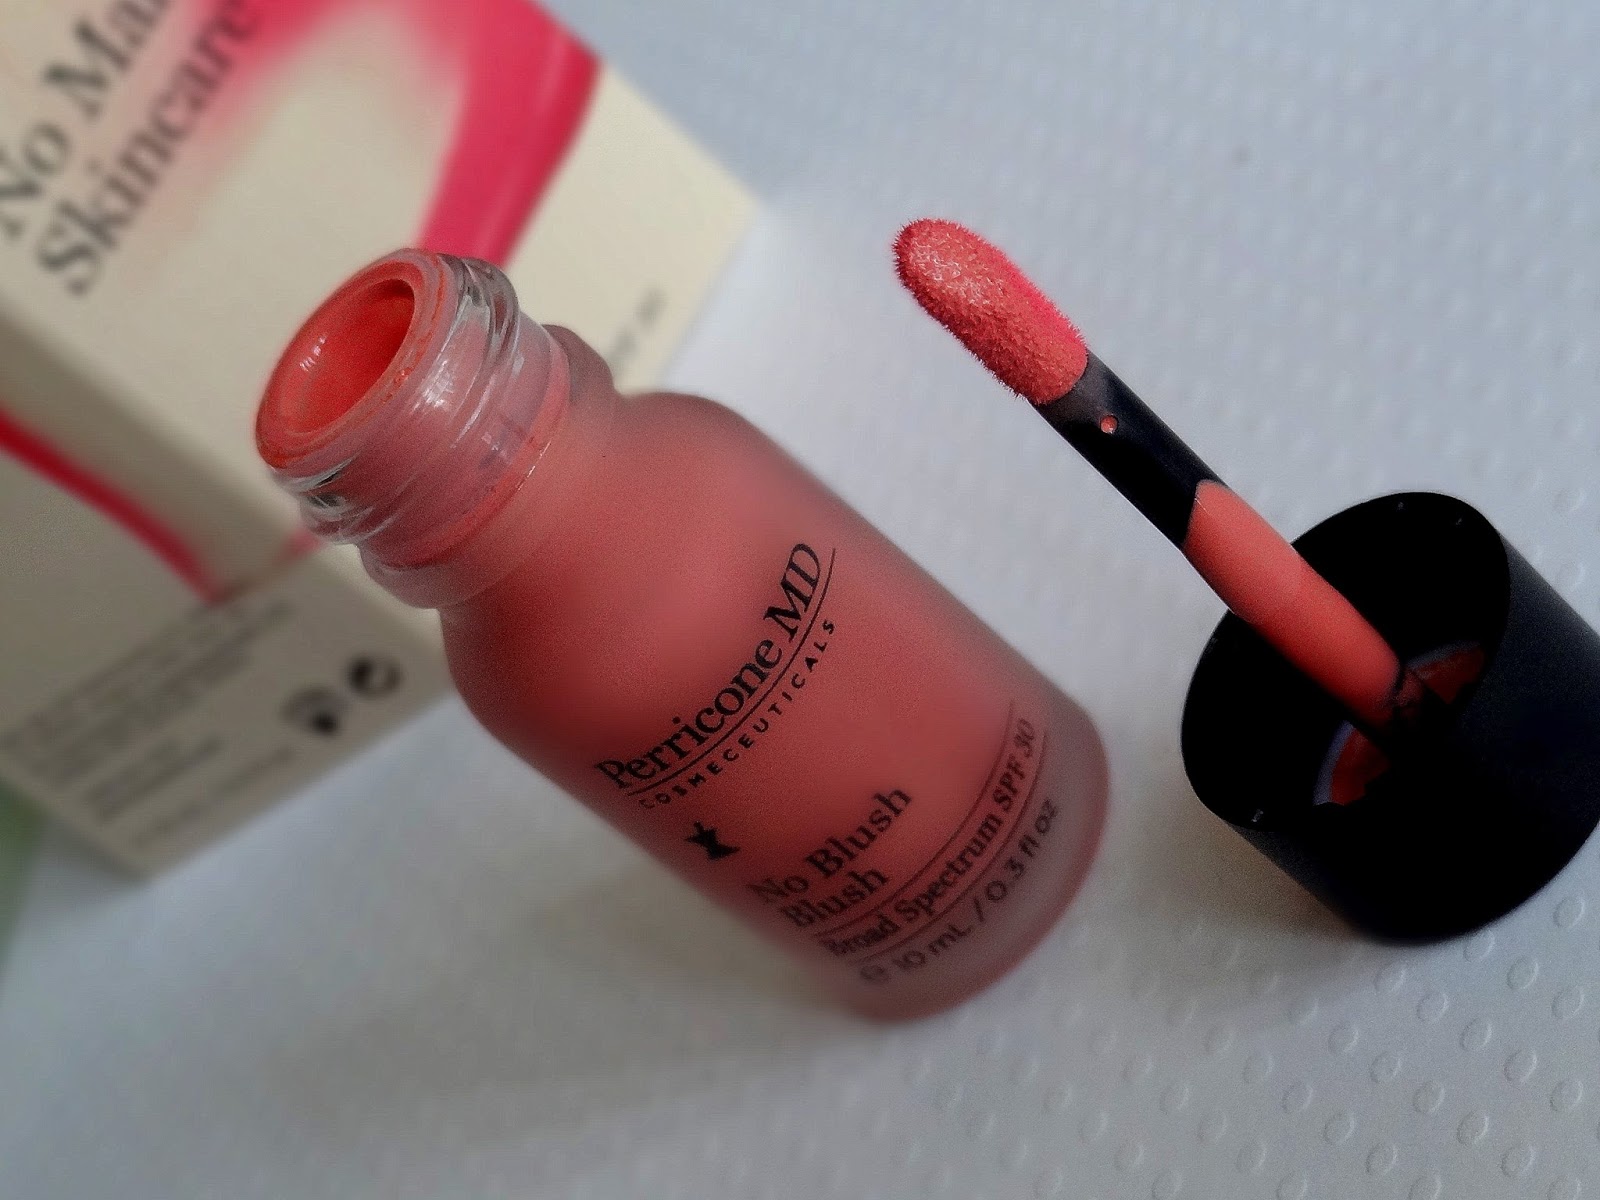 Perricone MD No Blush Blush Review, Photos & Swatches